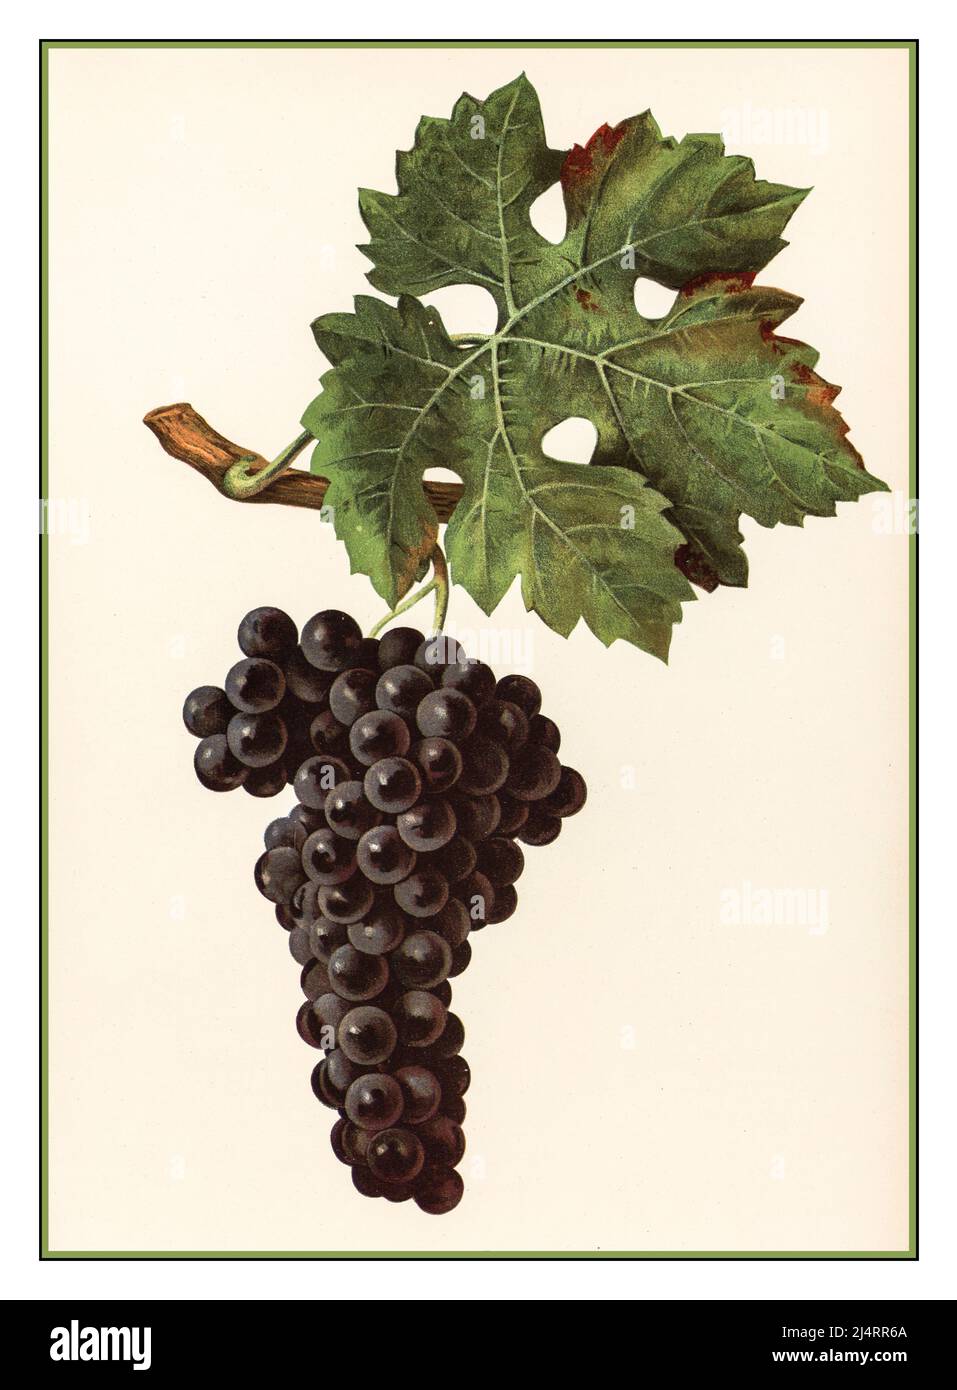 WINE GRAPES Vintage lithograph Illustration  1900s of a ripe bunch of Cabernet Sauvignon grapes on the vine  Cabernet Sauvignon is one of the world's most widely recognized red wine grape varieties. It is grown in nearly every major wine producing country among a diverse spectrum of climates from Australia and British Columbia, Canada to Lebanon's Beqaa Valley. Cabernet Sauvignon became internationally recognized through its prominence in Bordeaux wines where it is often blended with Merlot and Cabernet Franc. Stock Photo